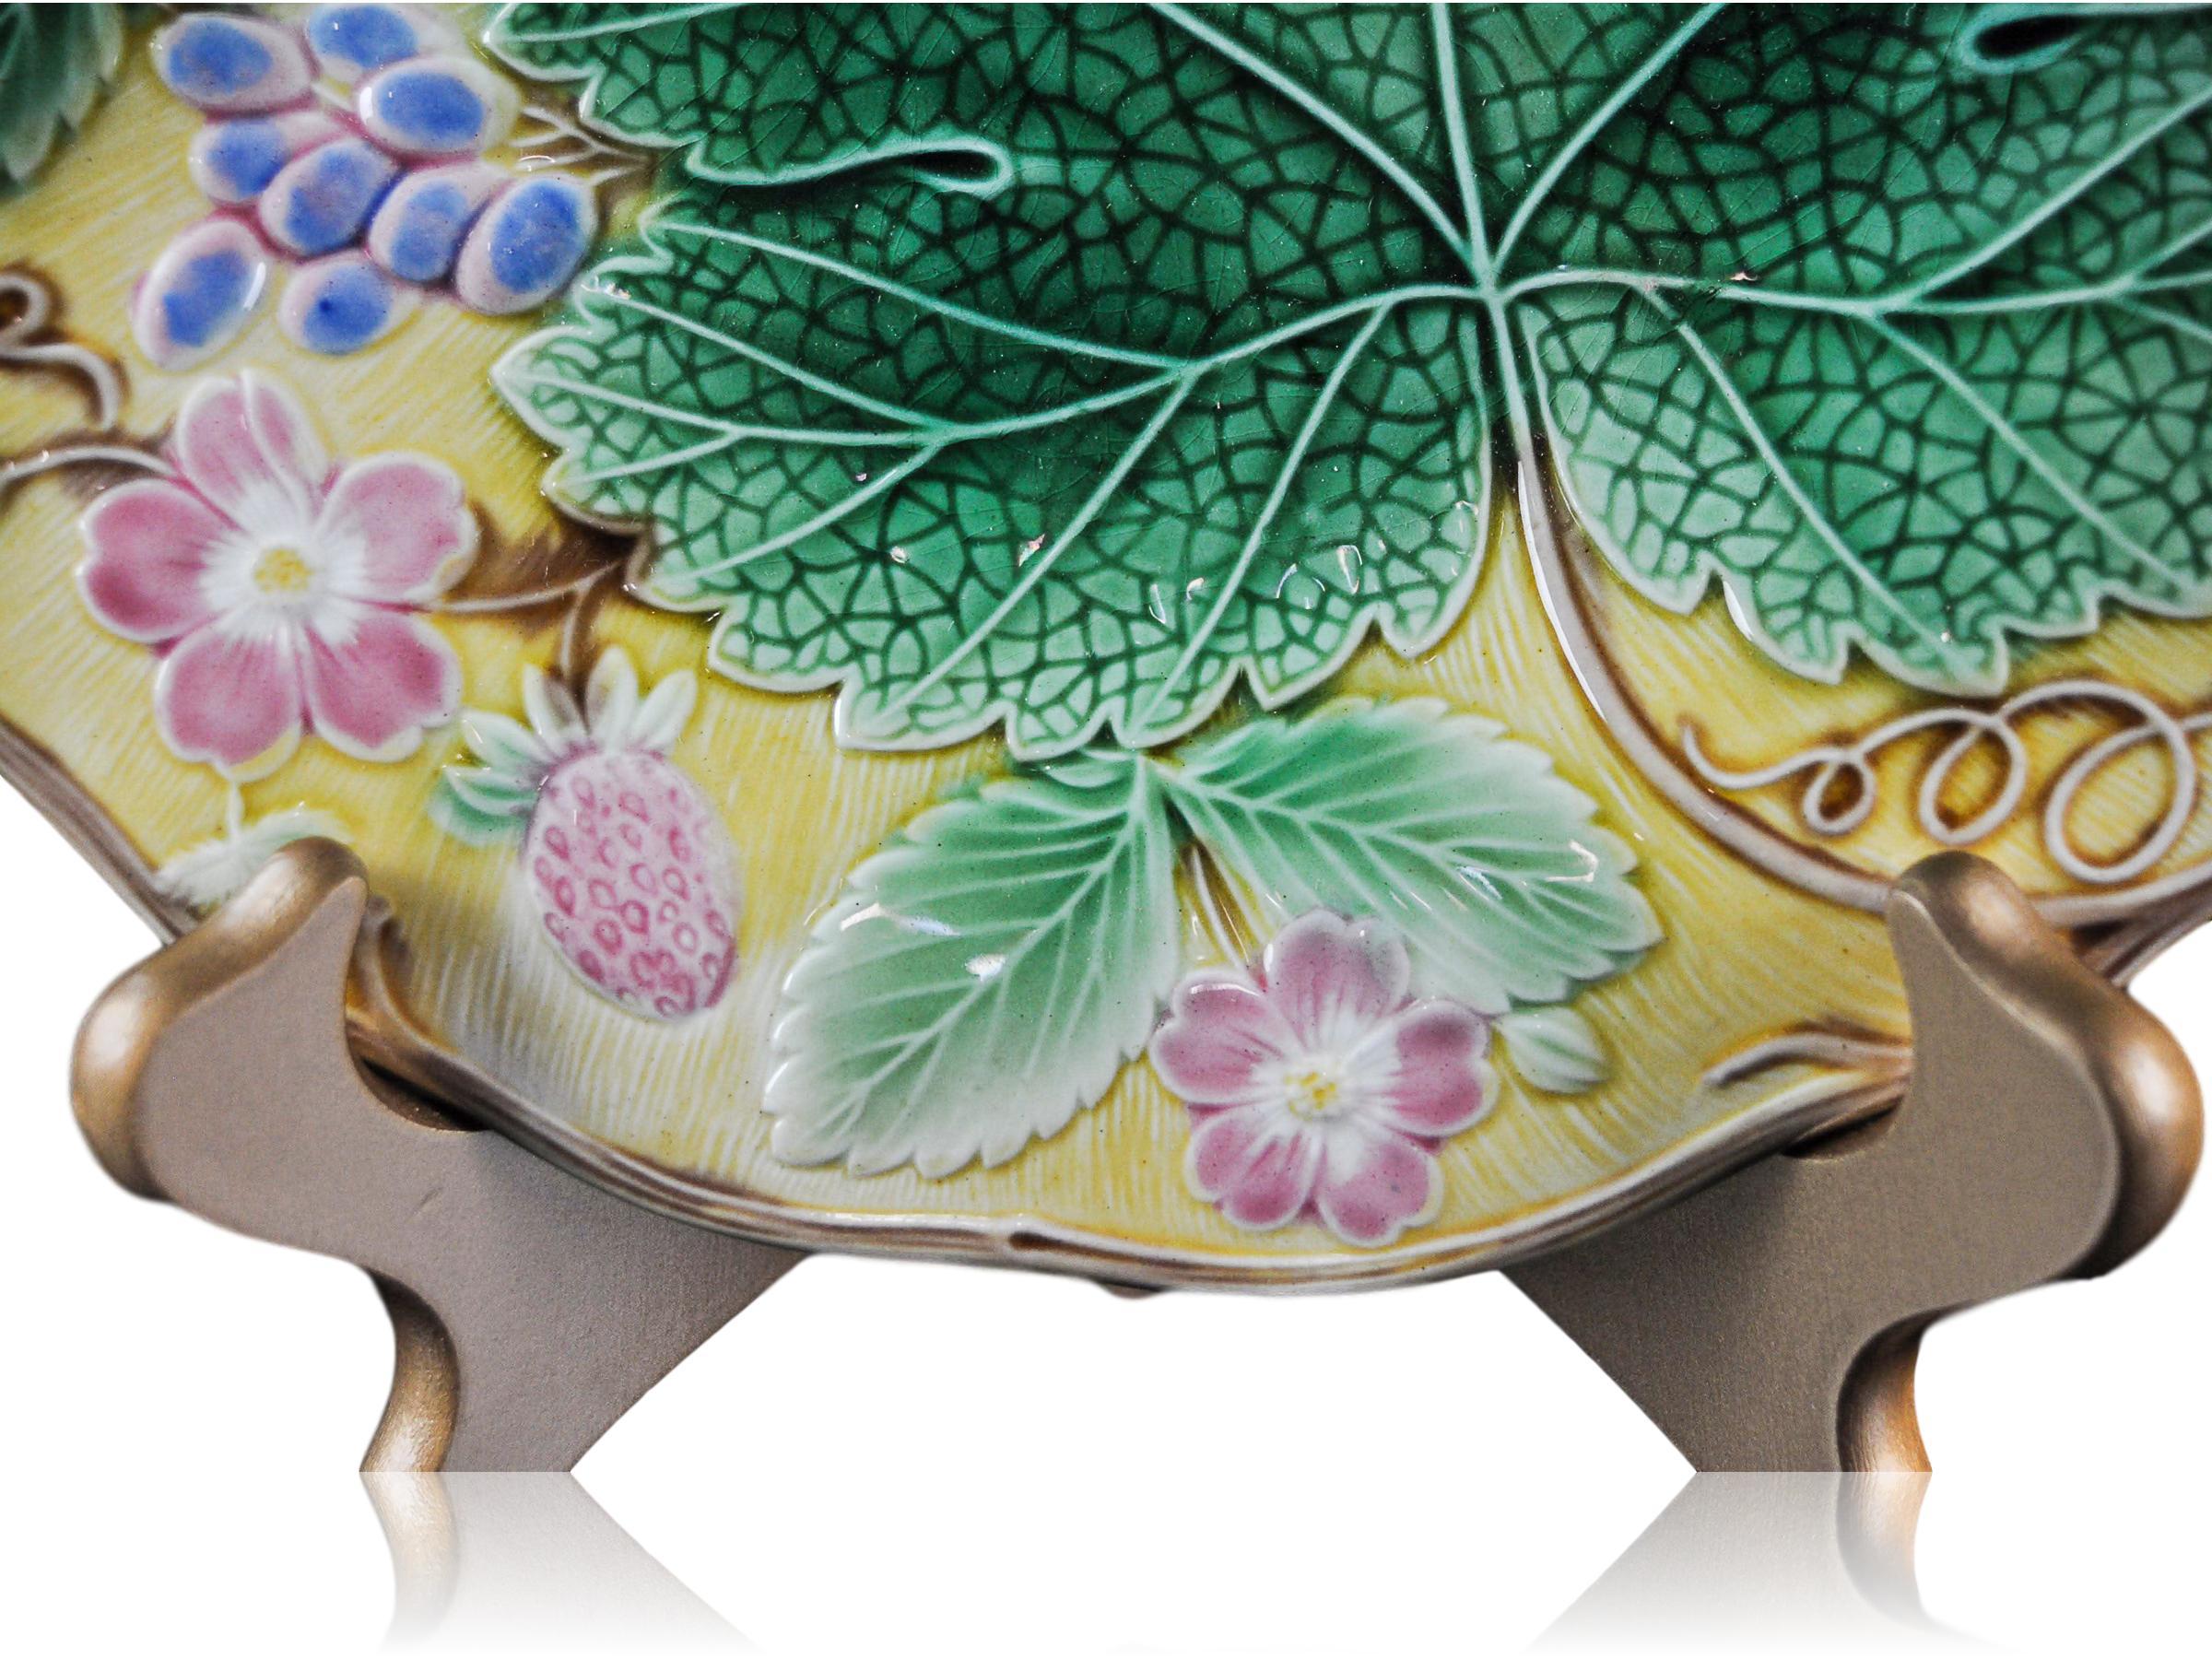 Early 20th Century Wedgwood Majolica 'Vine & Strawberry' Plate, English, Dated 1929, Yellow Ground